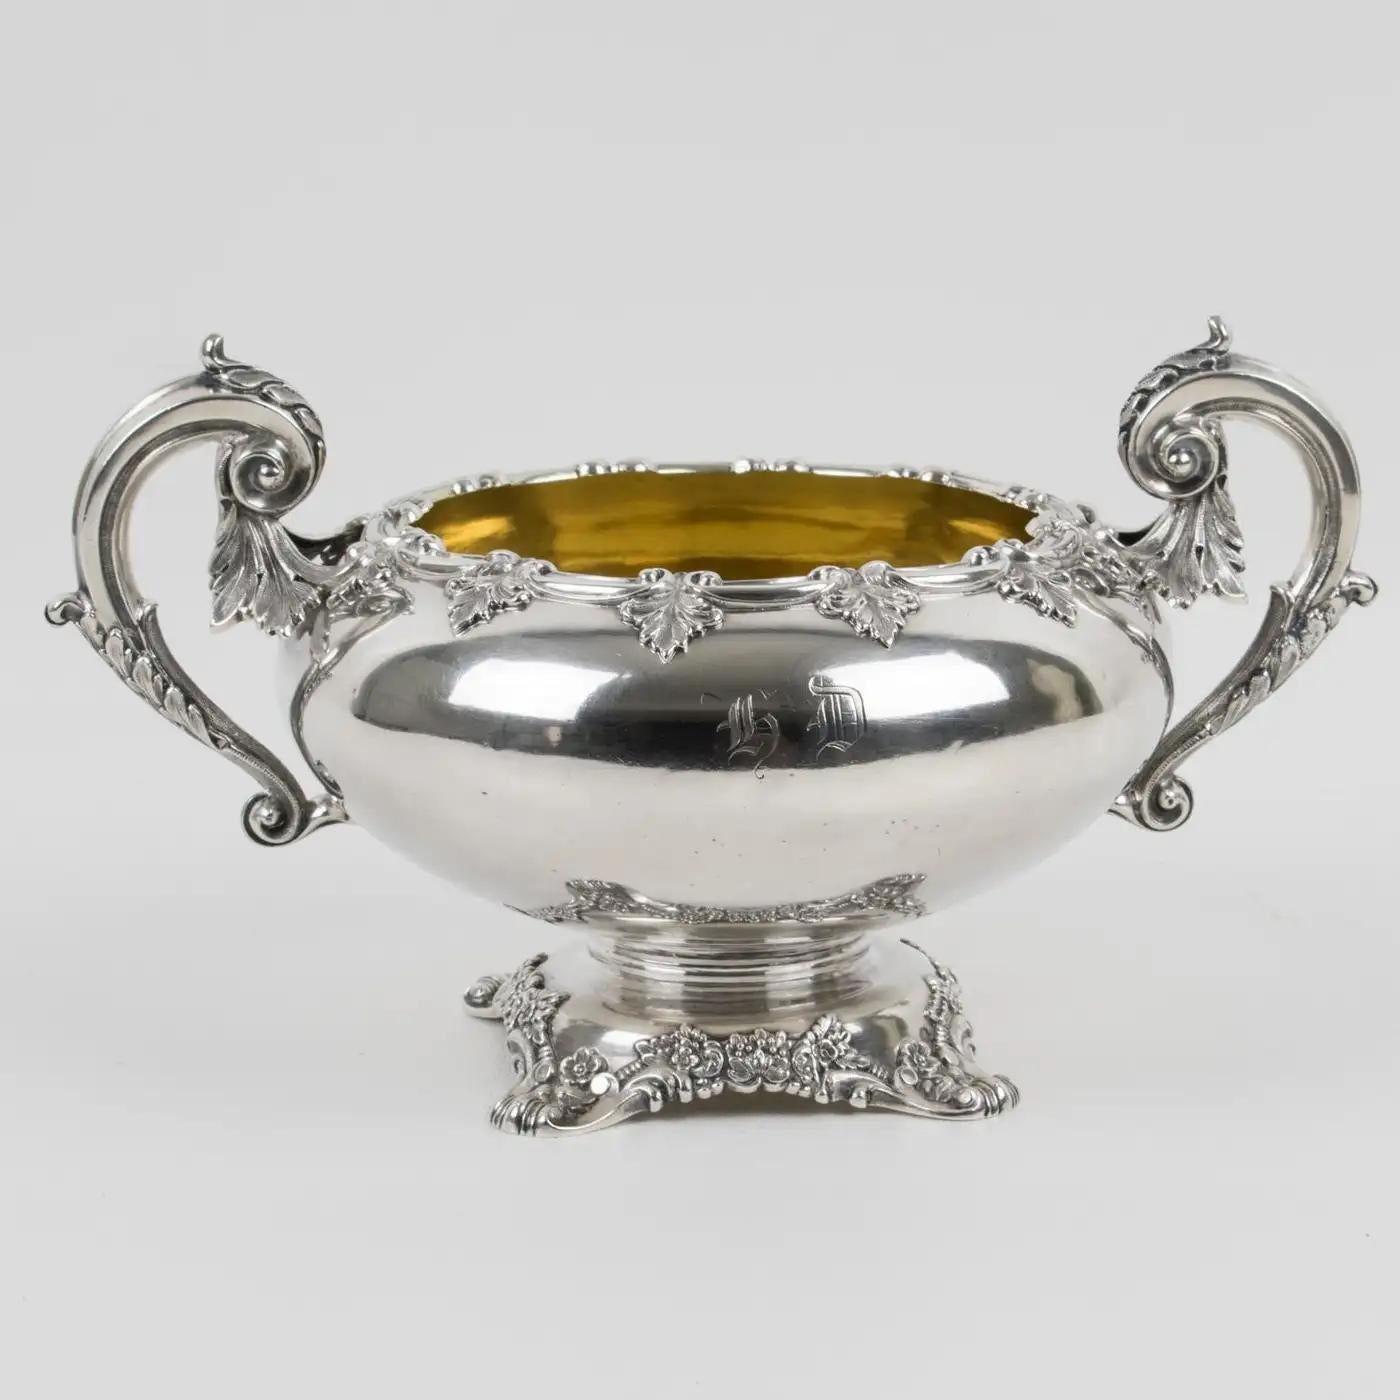 This is a turn of the 19th Century sterling silver decorative bowl designed and crafted by Odiot, Paris. The rounded shape resting on a floral pedestal has an 